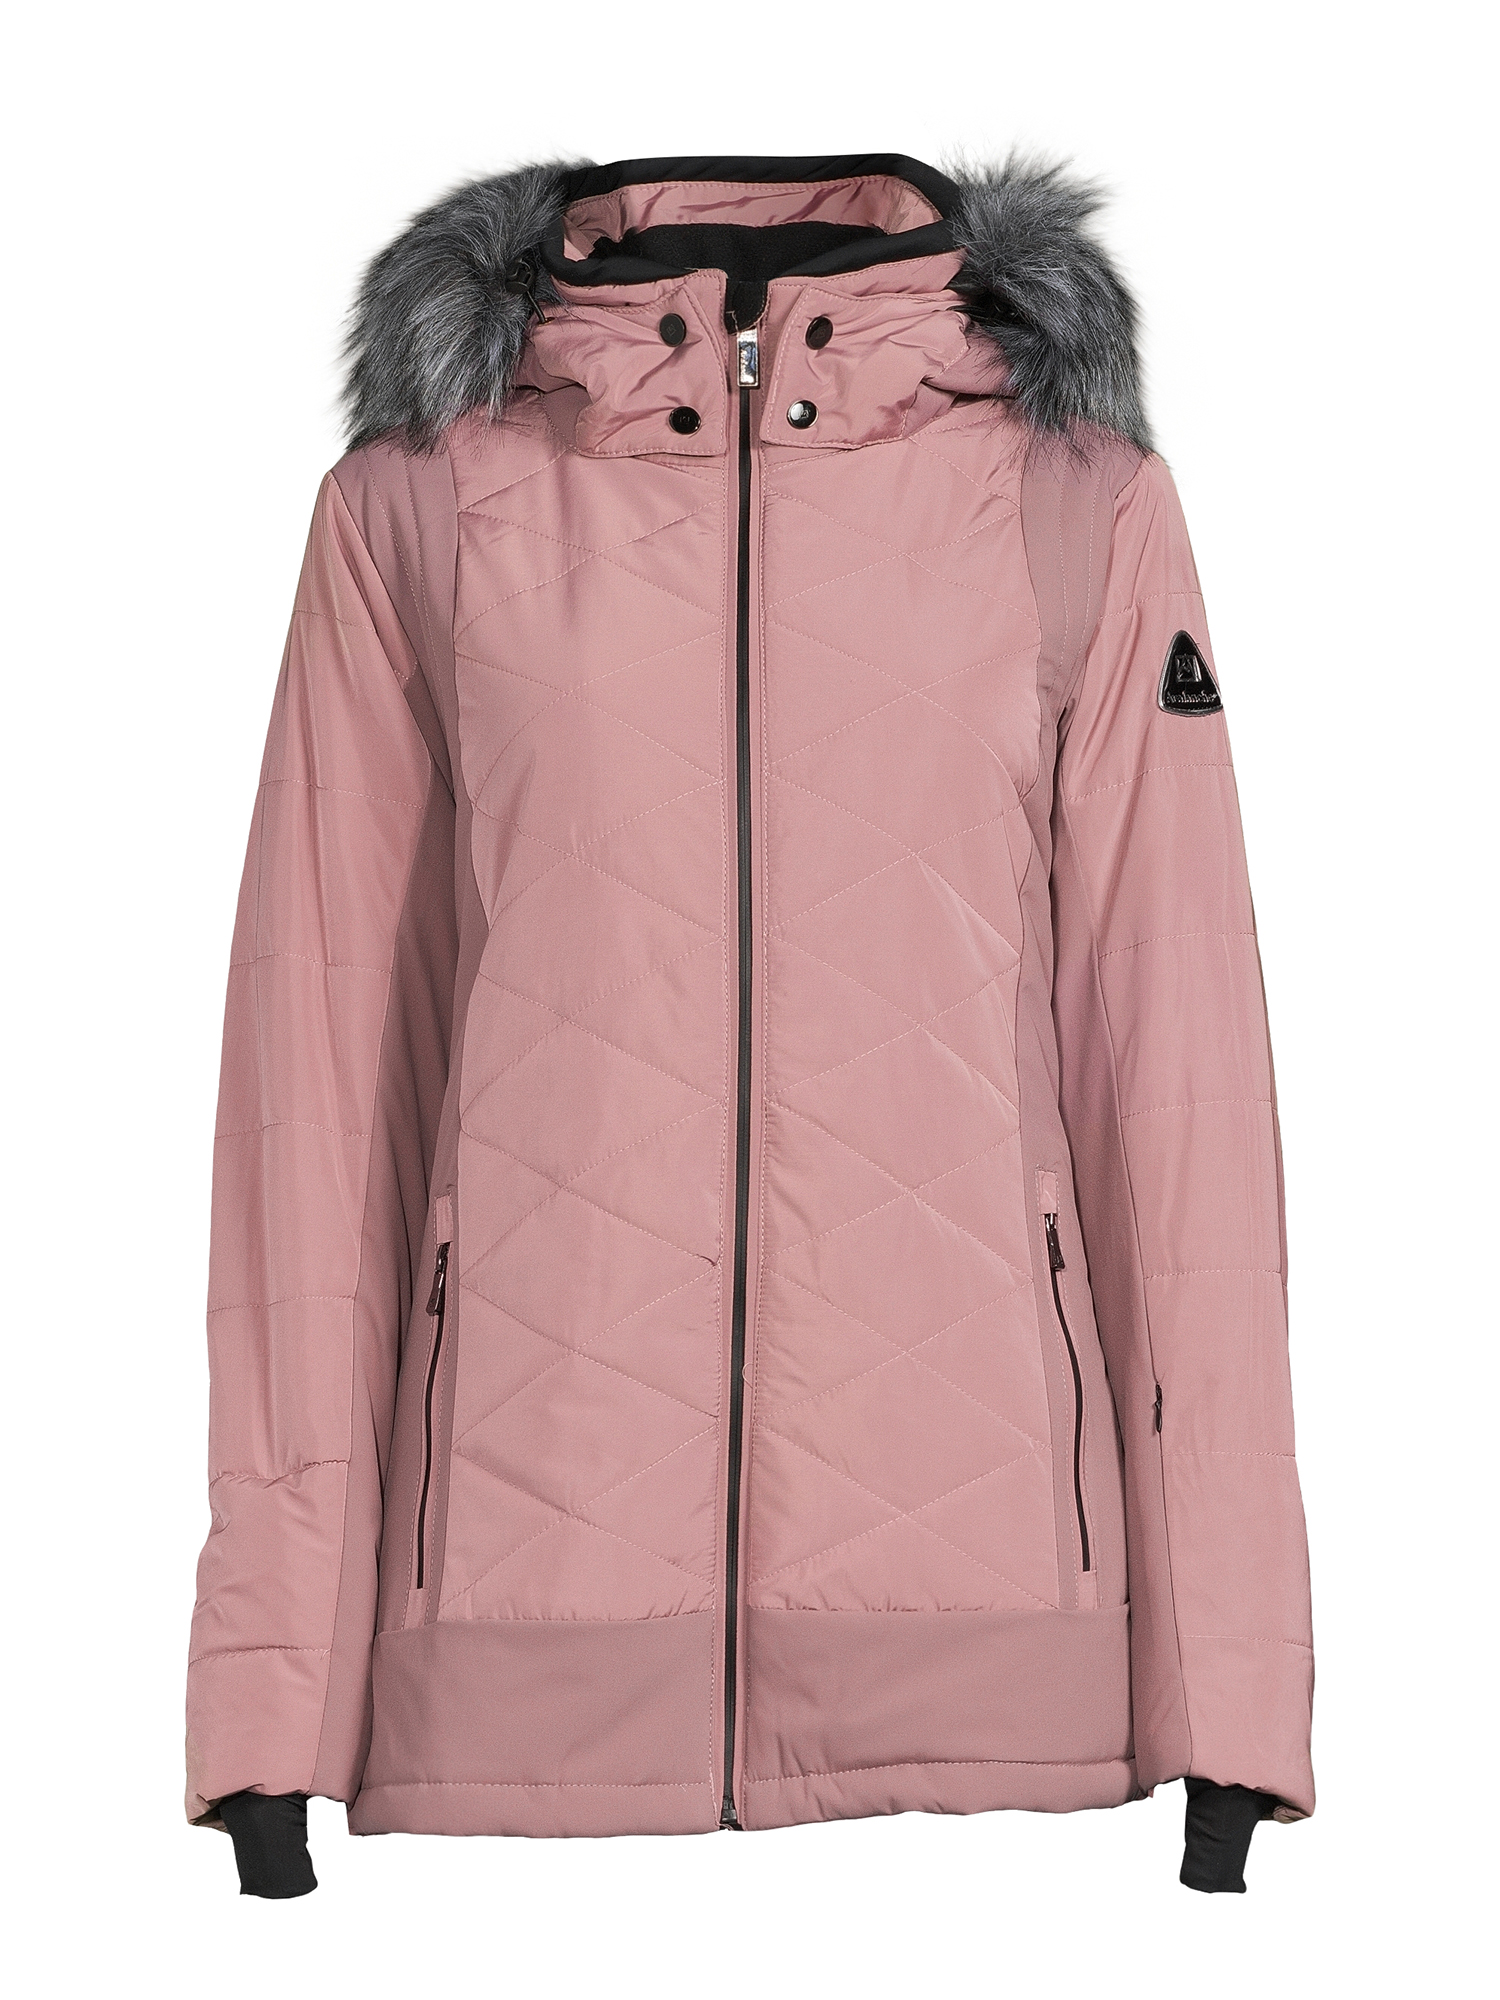 Avalanche Women's Quilted Hooded Ski Jacket - image 5 of 5